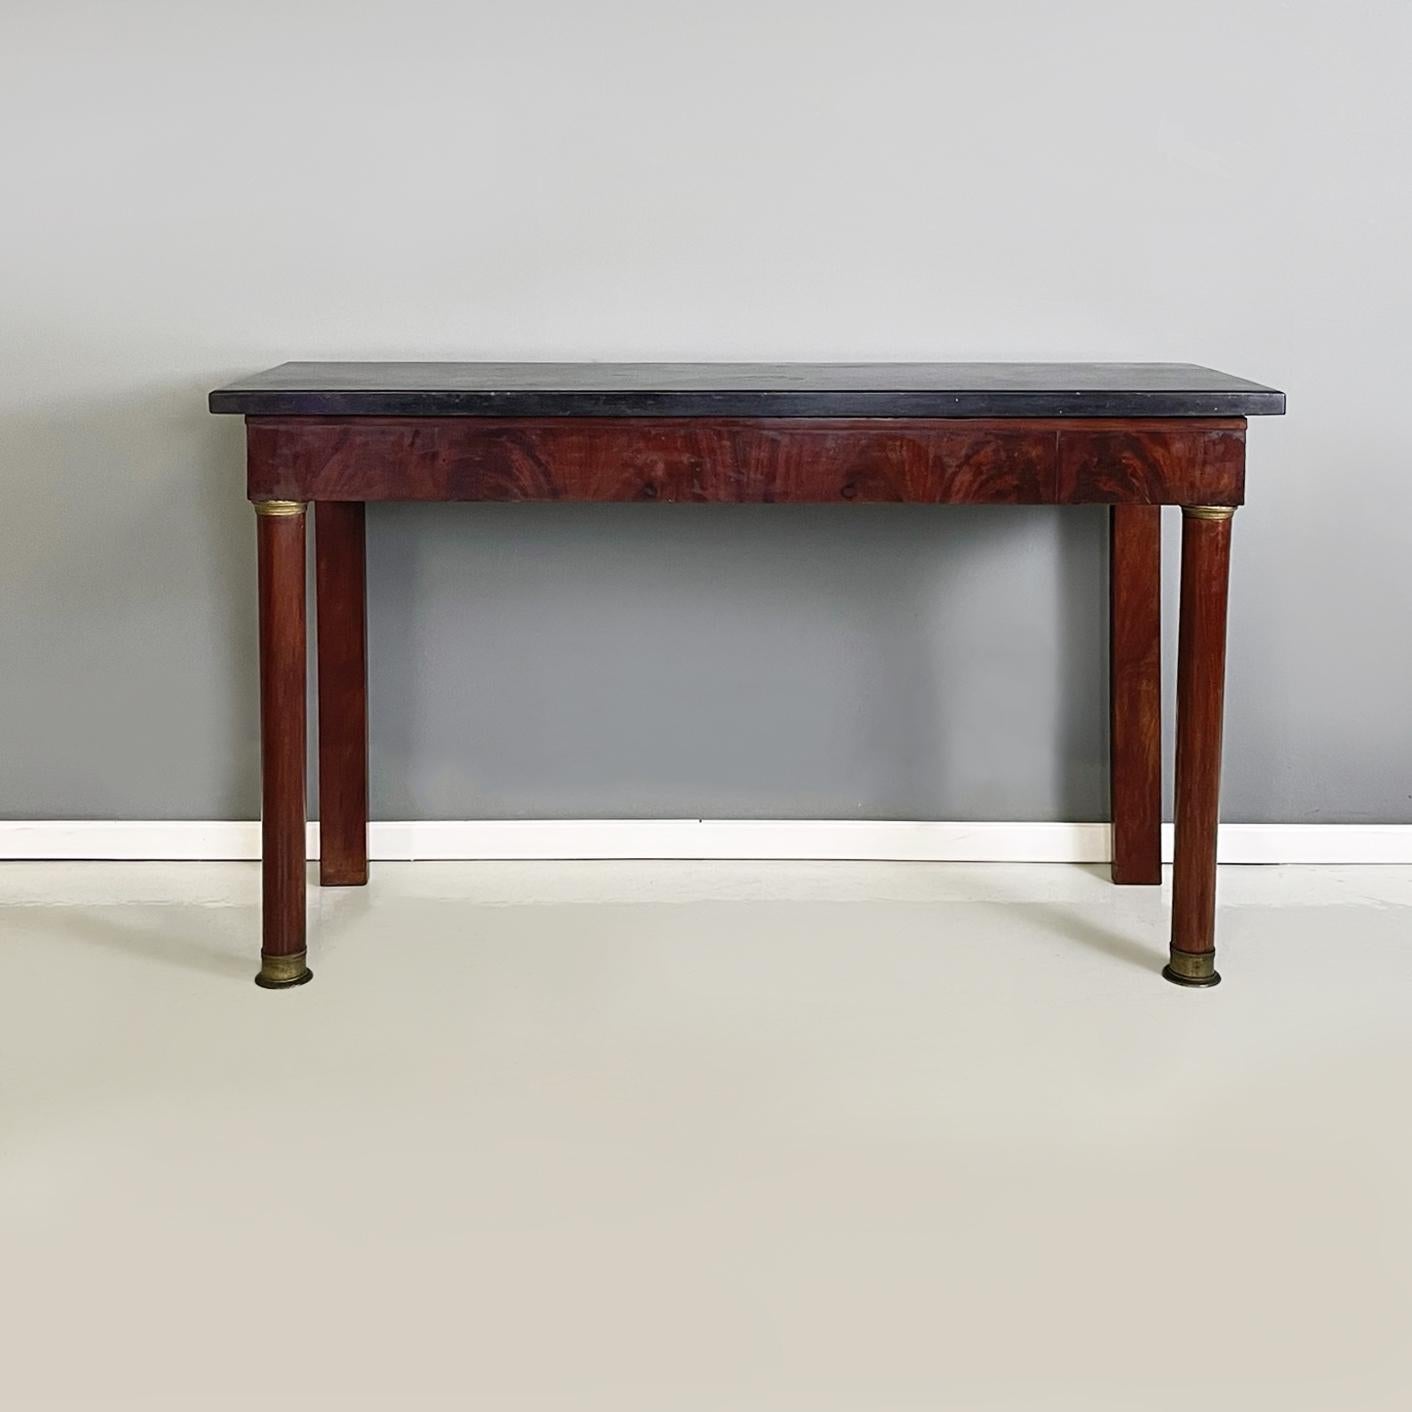 Empire Italian console in black marble, bronze and walnut wood, 1820-1830s
Console with rectangular top in Belgian black marble. The structure and legs are in veneer in walnut feather and interior in solid walnut. The front legs with a round section